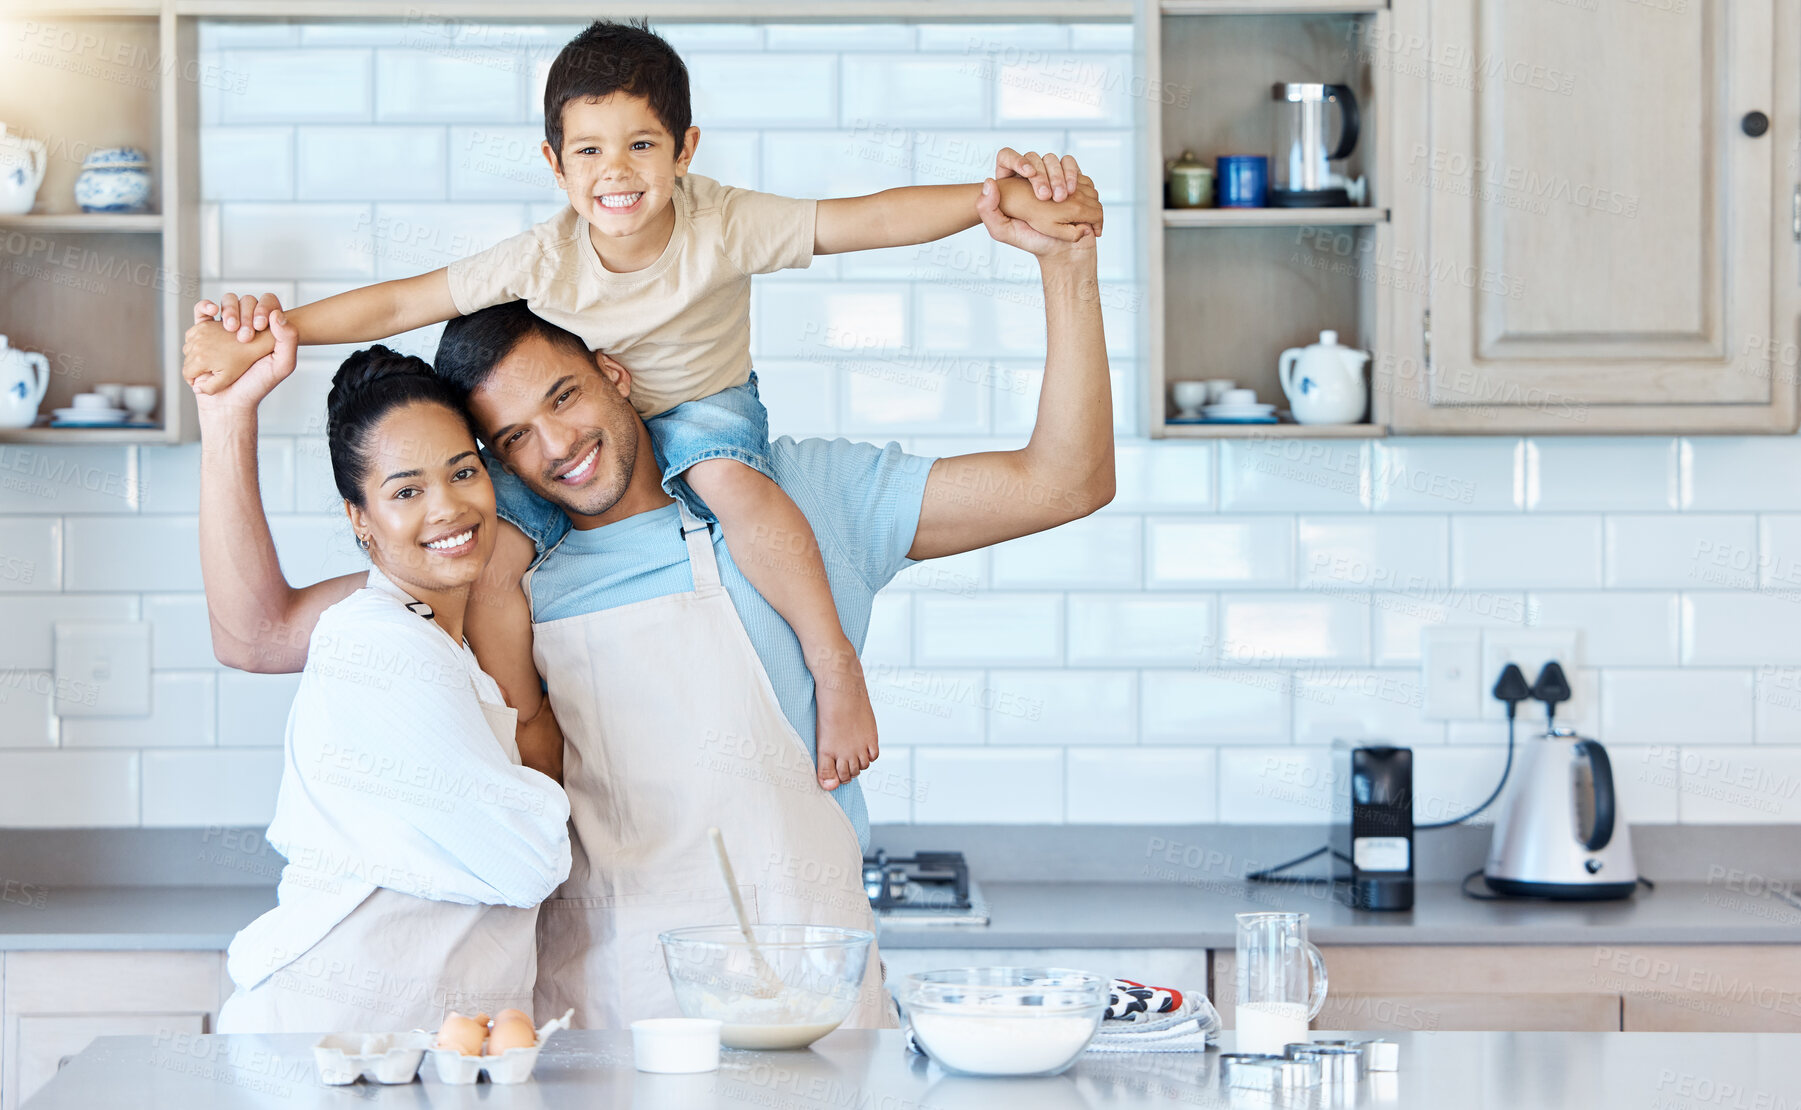 Buy stock photo Portrait of happy young mixed race couple bonding with their adorable son in a home kitchen while baking. Hispanic husband carrying a child on his shoulders while his wife embraces him. Time together